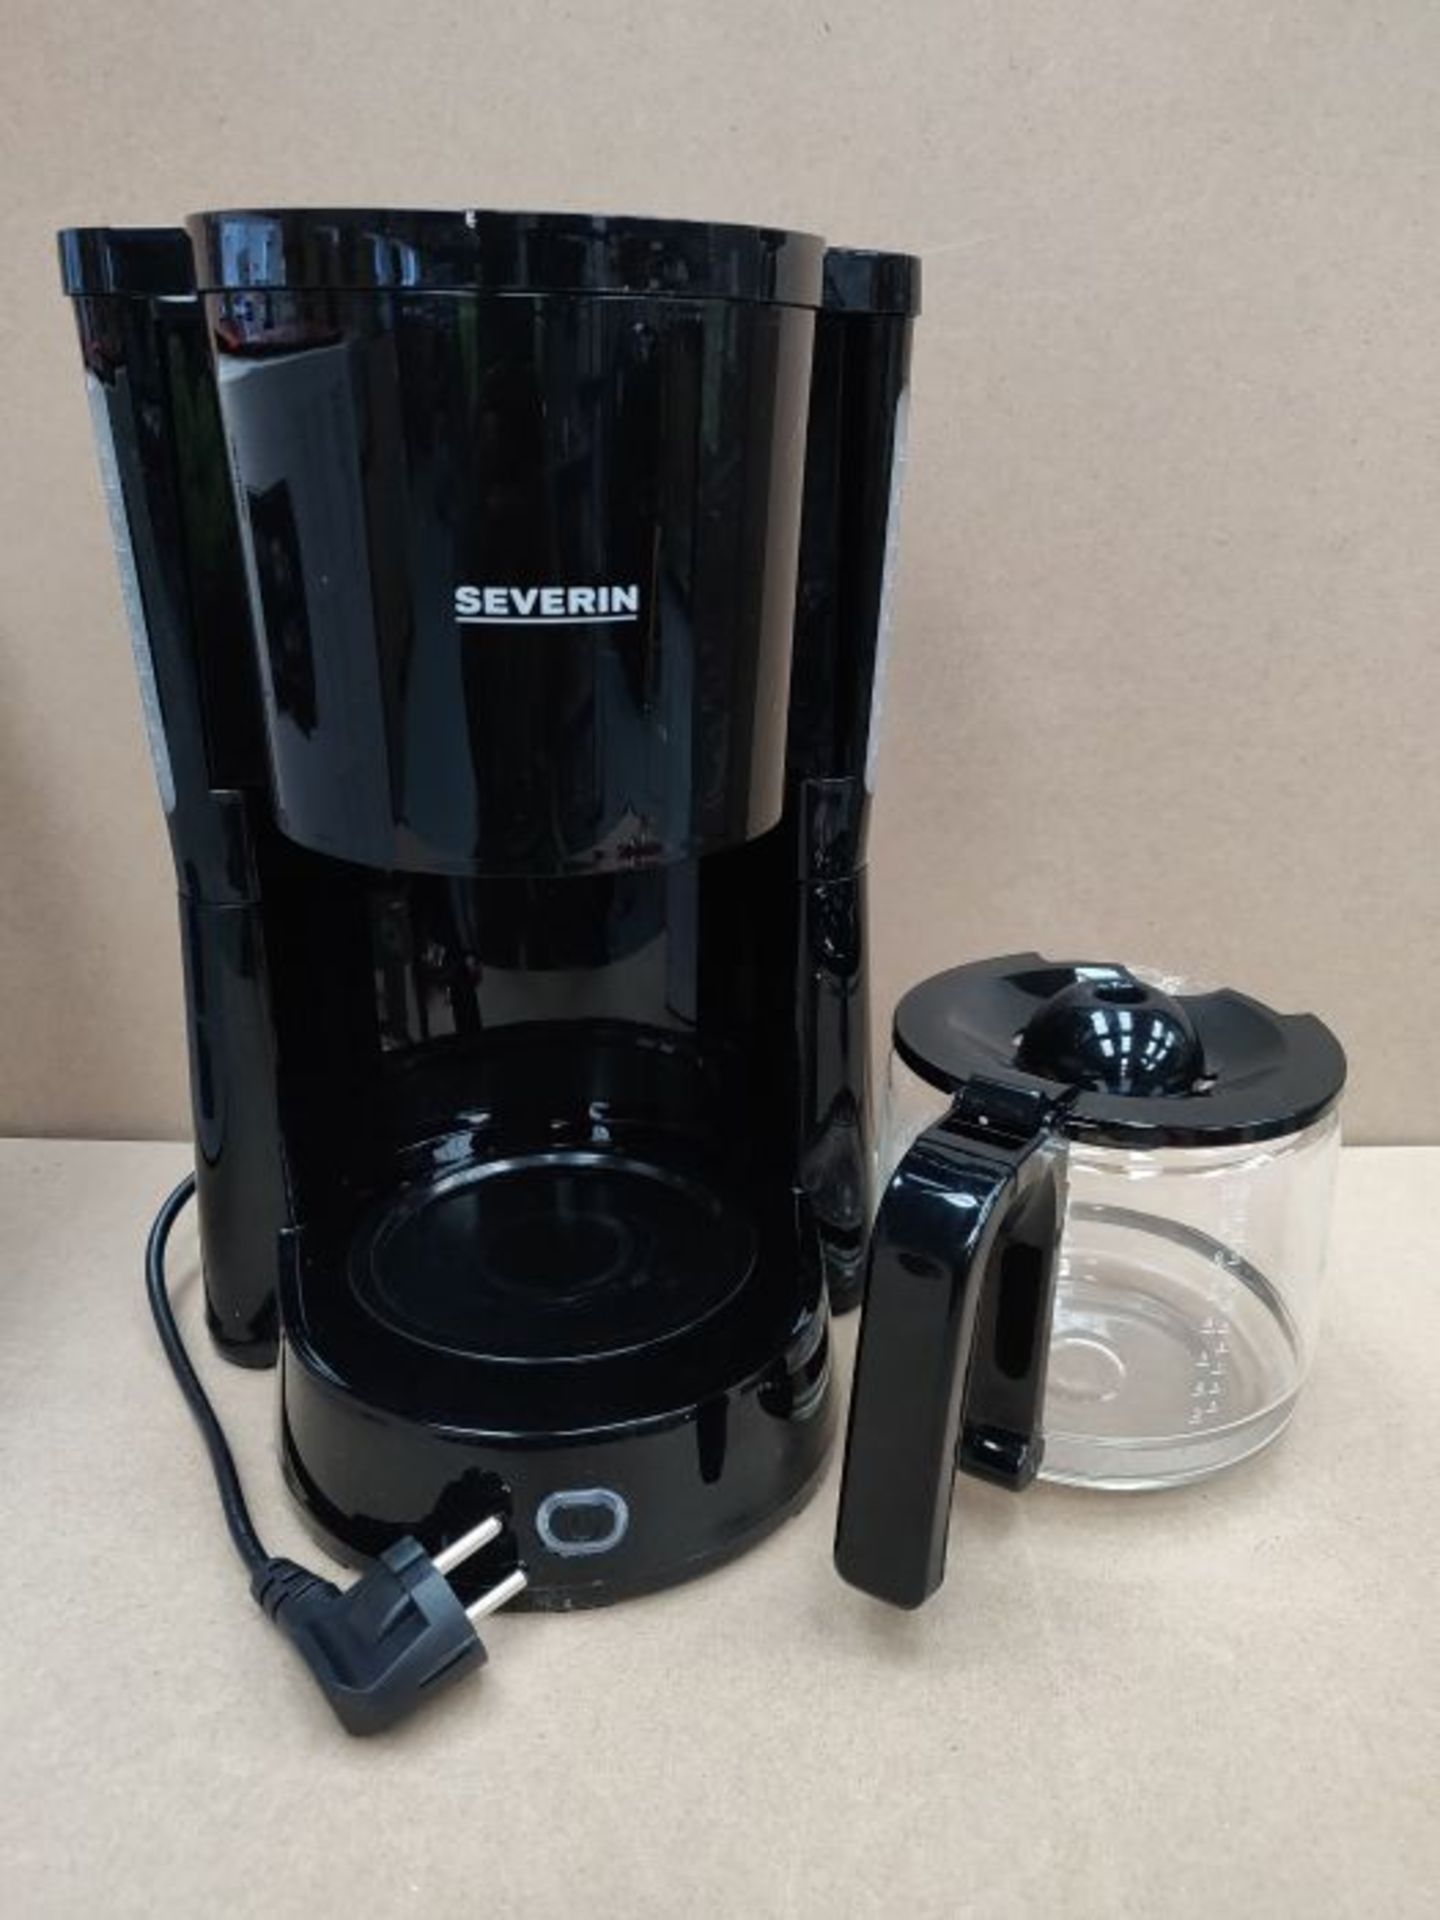 Severin Coffee Maker with 1000 W of Power KA 4815, Black - Image 3 of 3